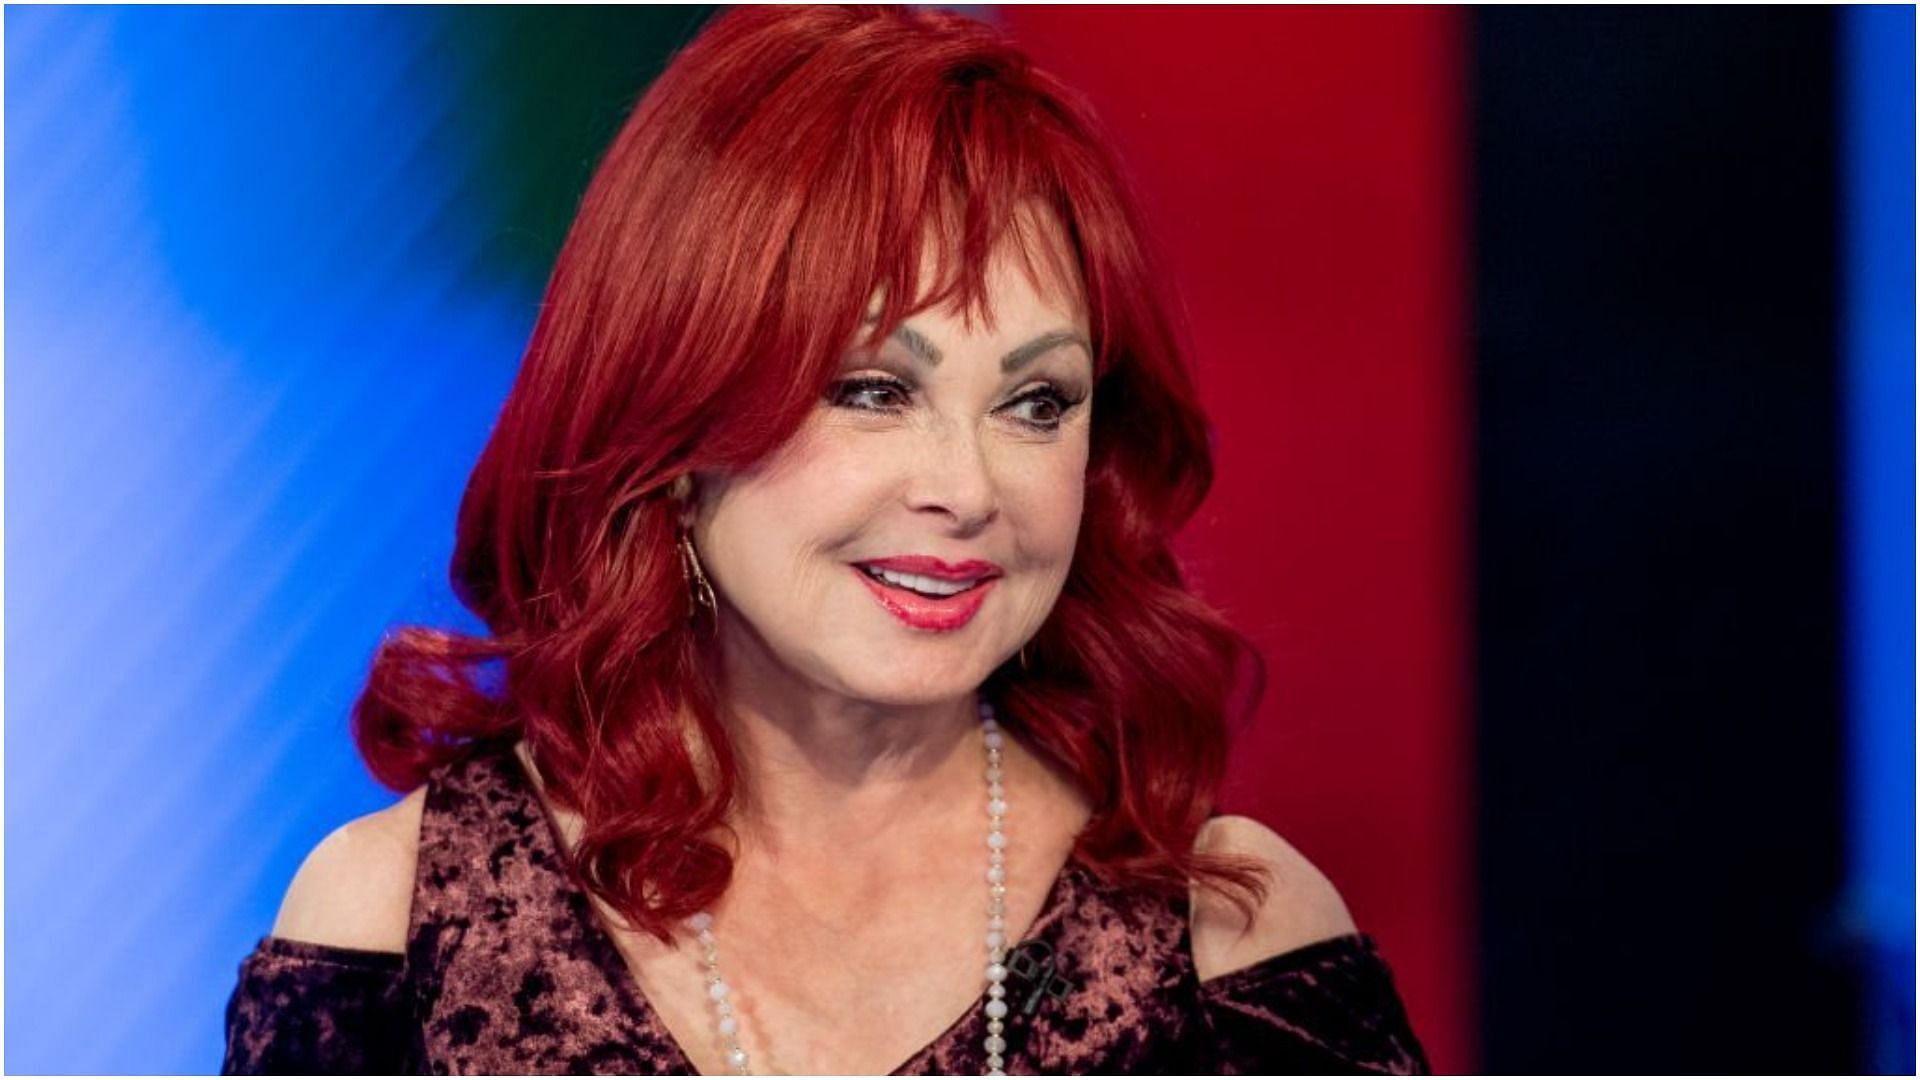 Naomi Judd was a popular singer and actress (Image via Roy Rochlin/Getty Images)